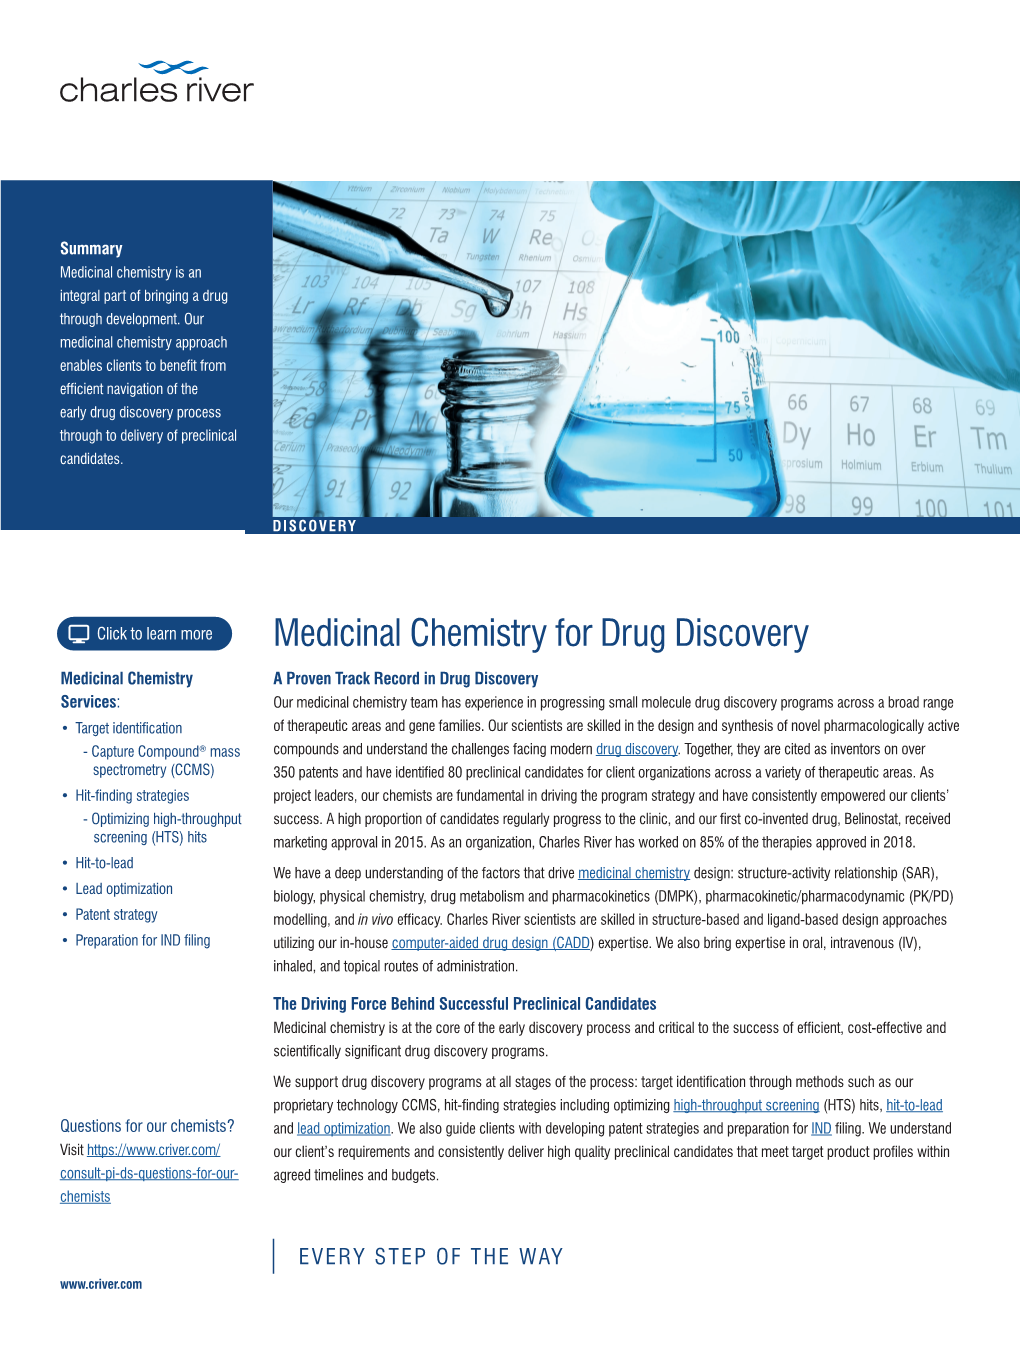 Medicinal Chemistry for Drug Discovery | Charles River